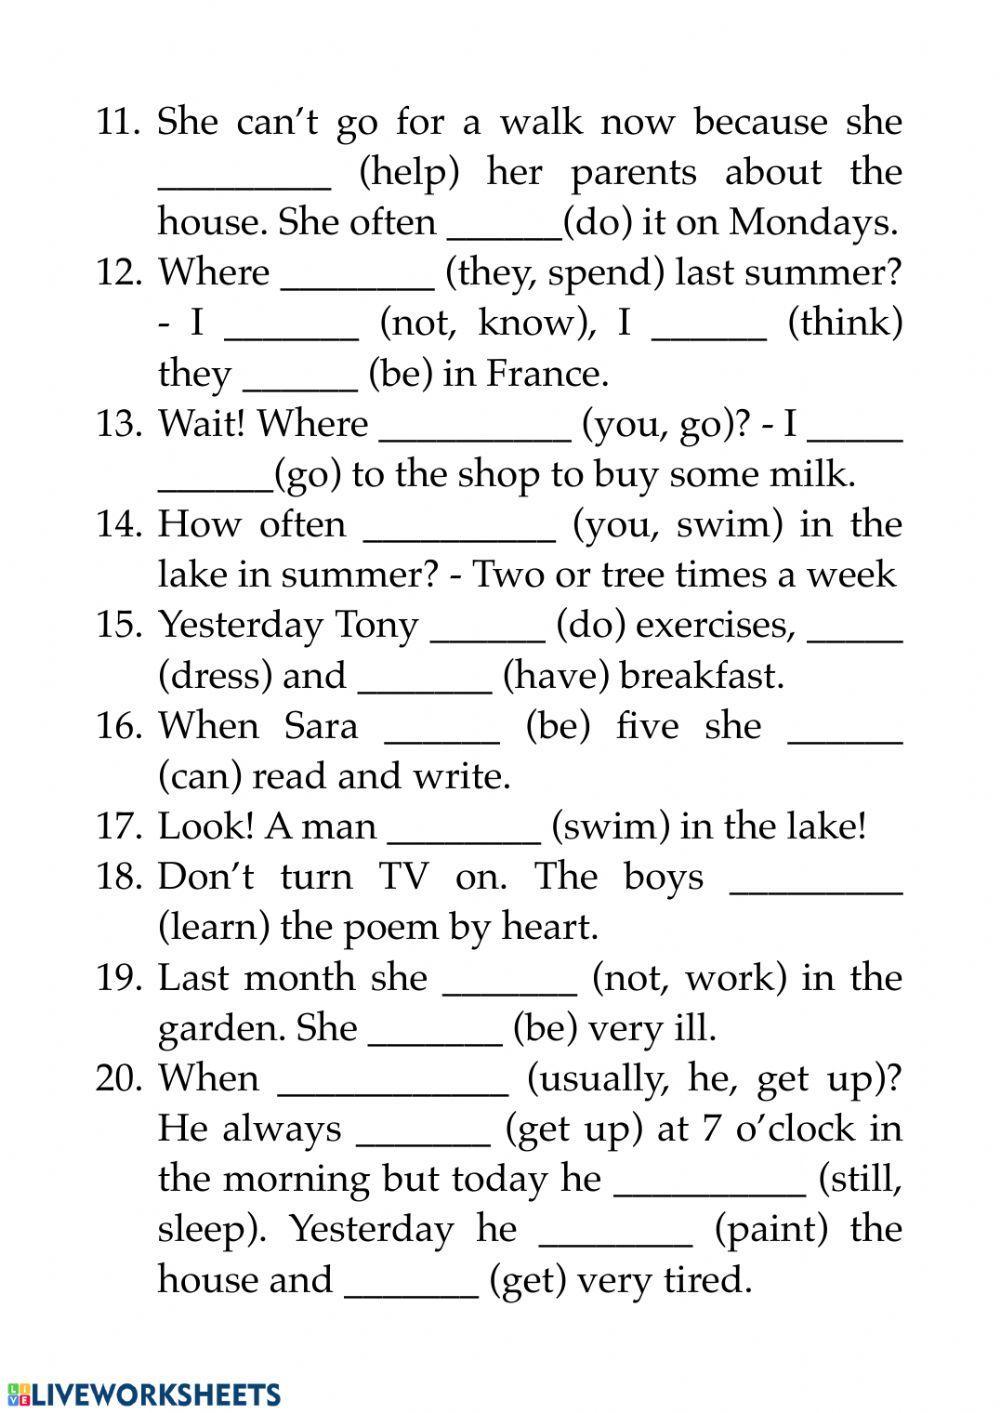 present-simple-past-simple-present-continuous-worksheet-live-worksheets